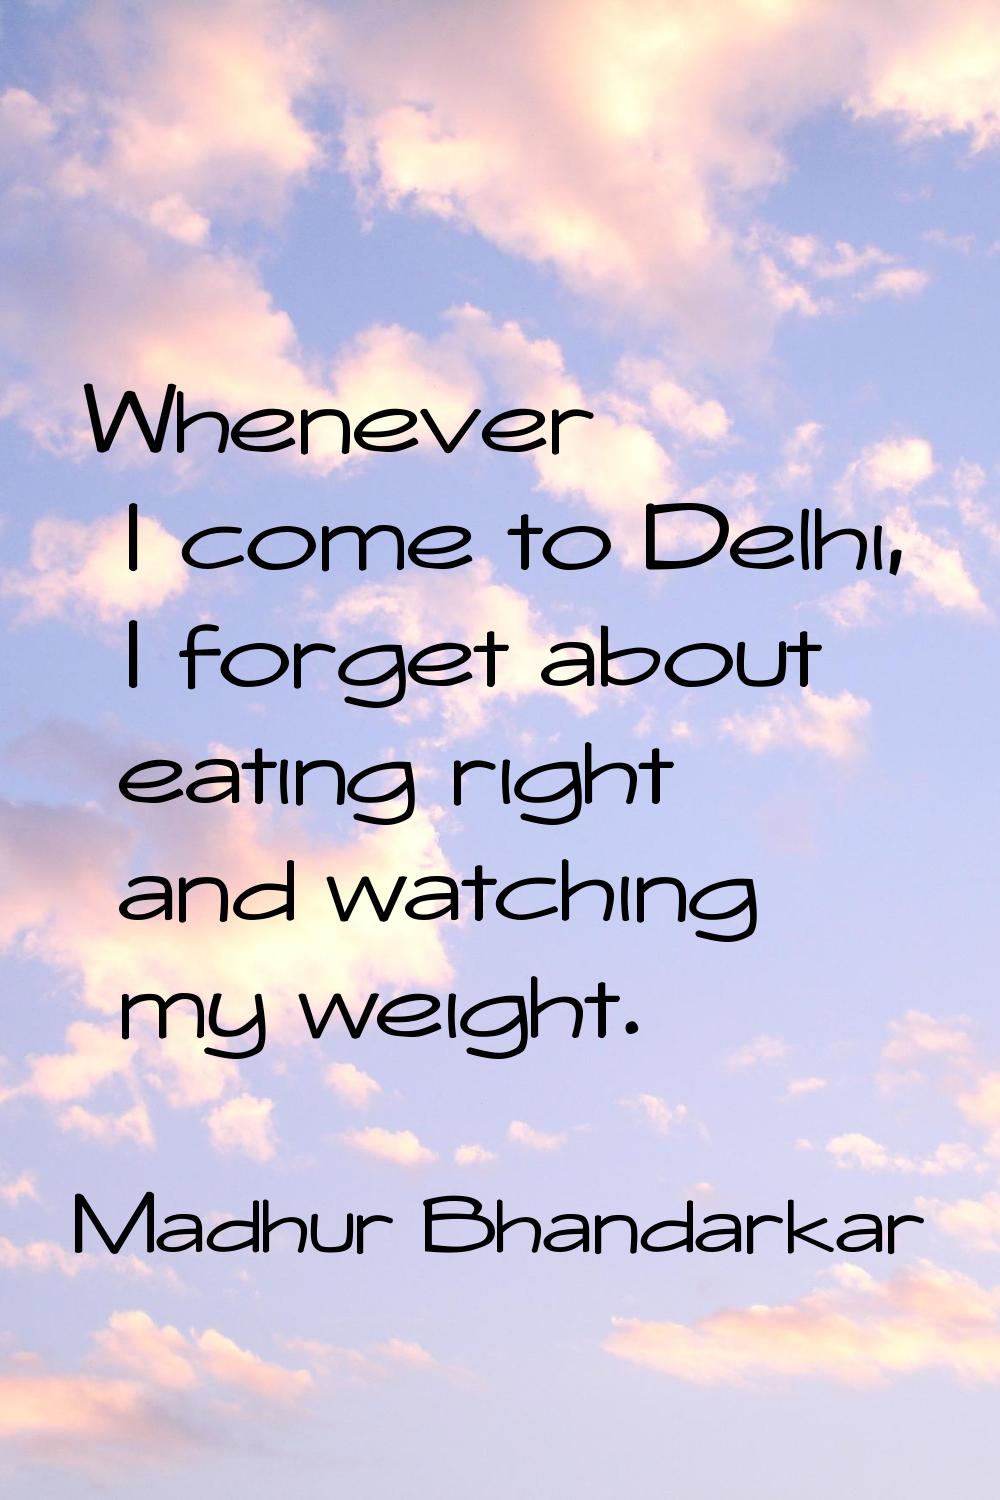 Whenever I come to Delhi, I forget about eating right and watching my weight.